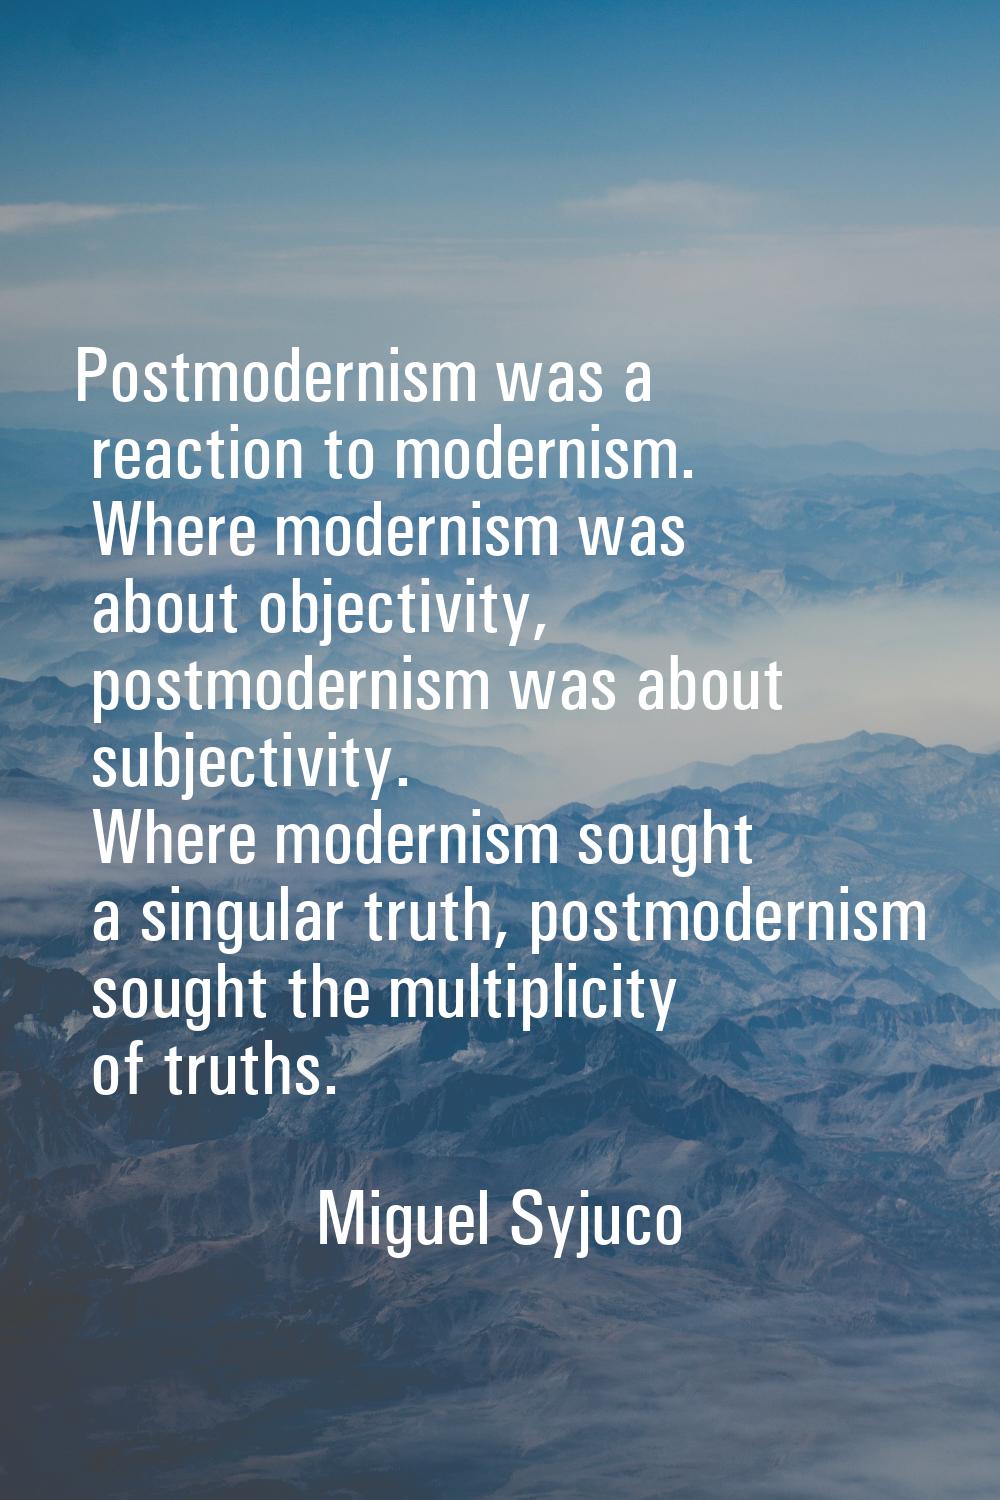 Postmodernism was a reaction to modernism. Where modernism was about objectivity, postmodernism was